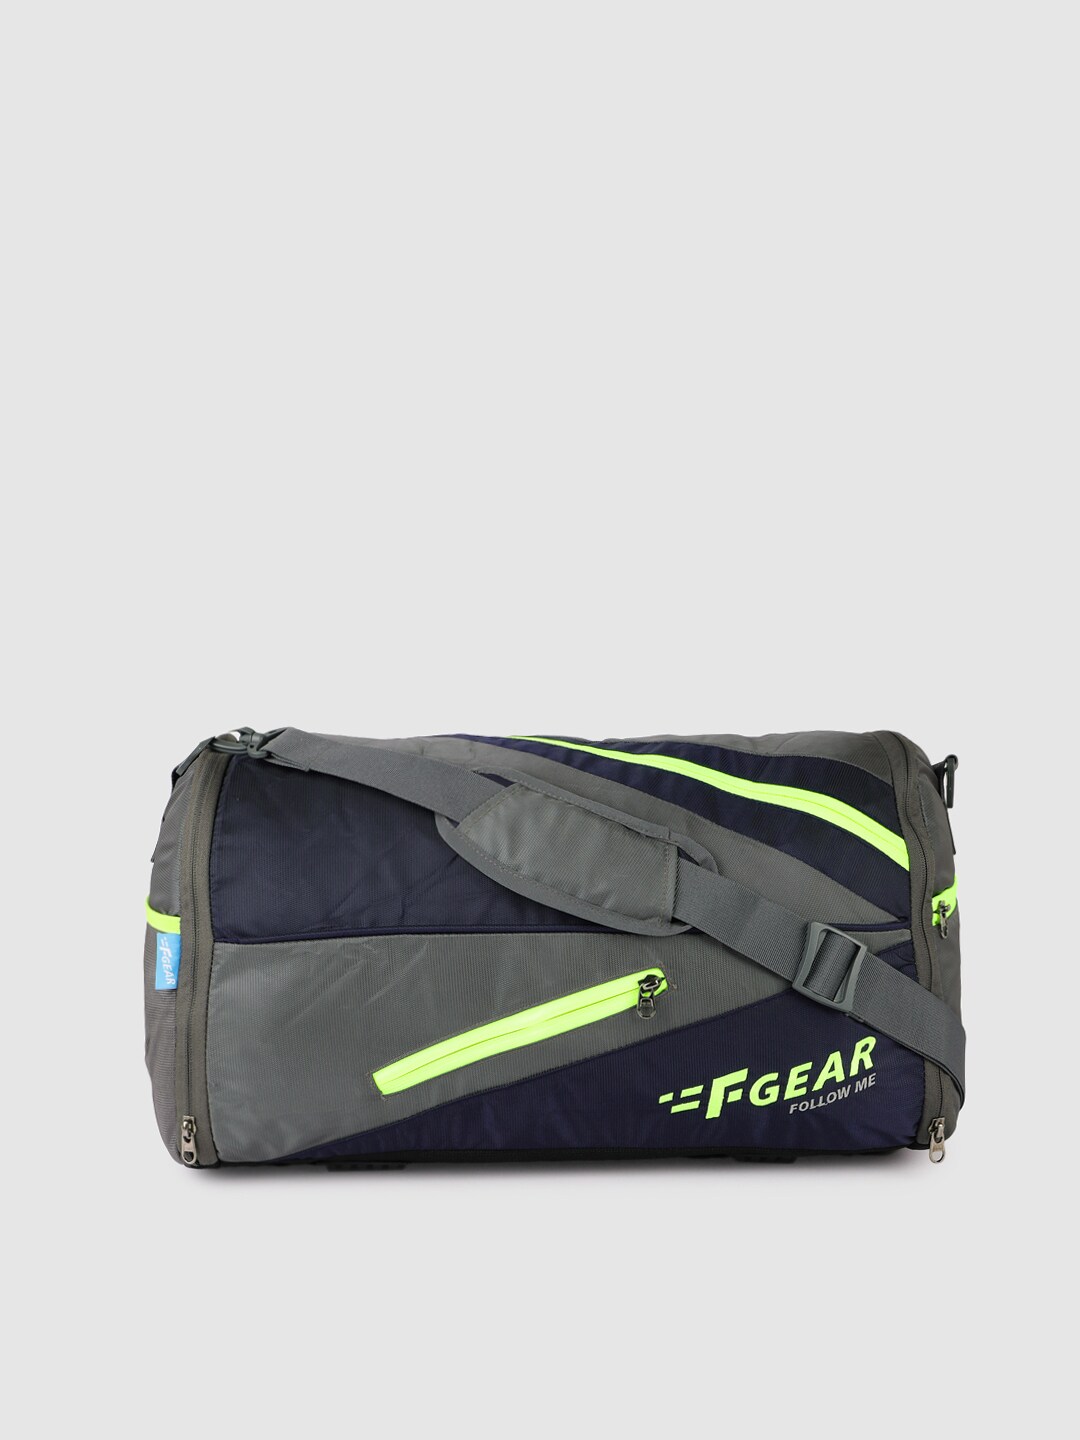 F Gear Unisex Grey & Navy Blue Surge Printed Duffle Bag Price in India